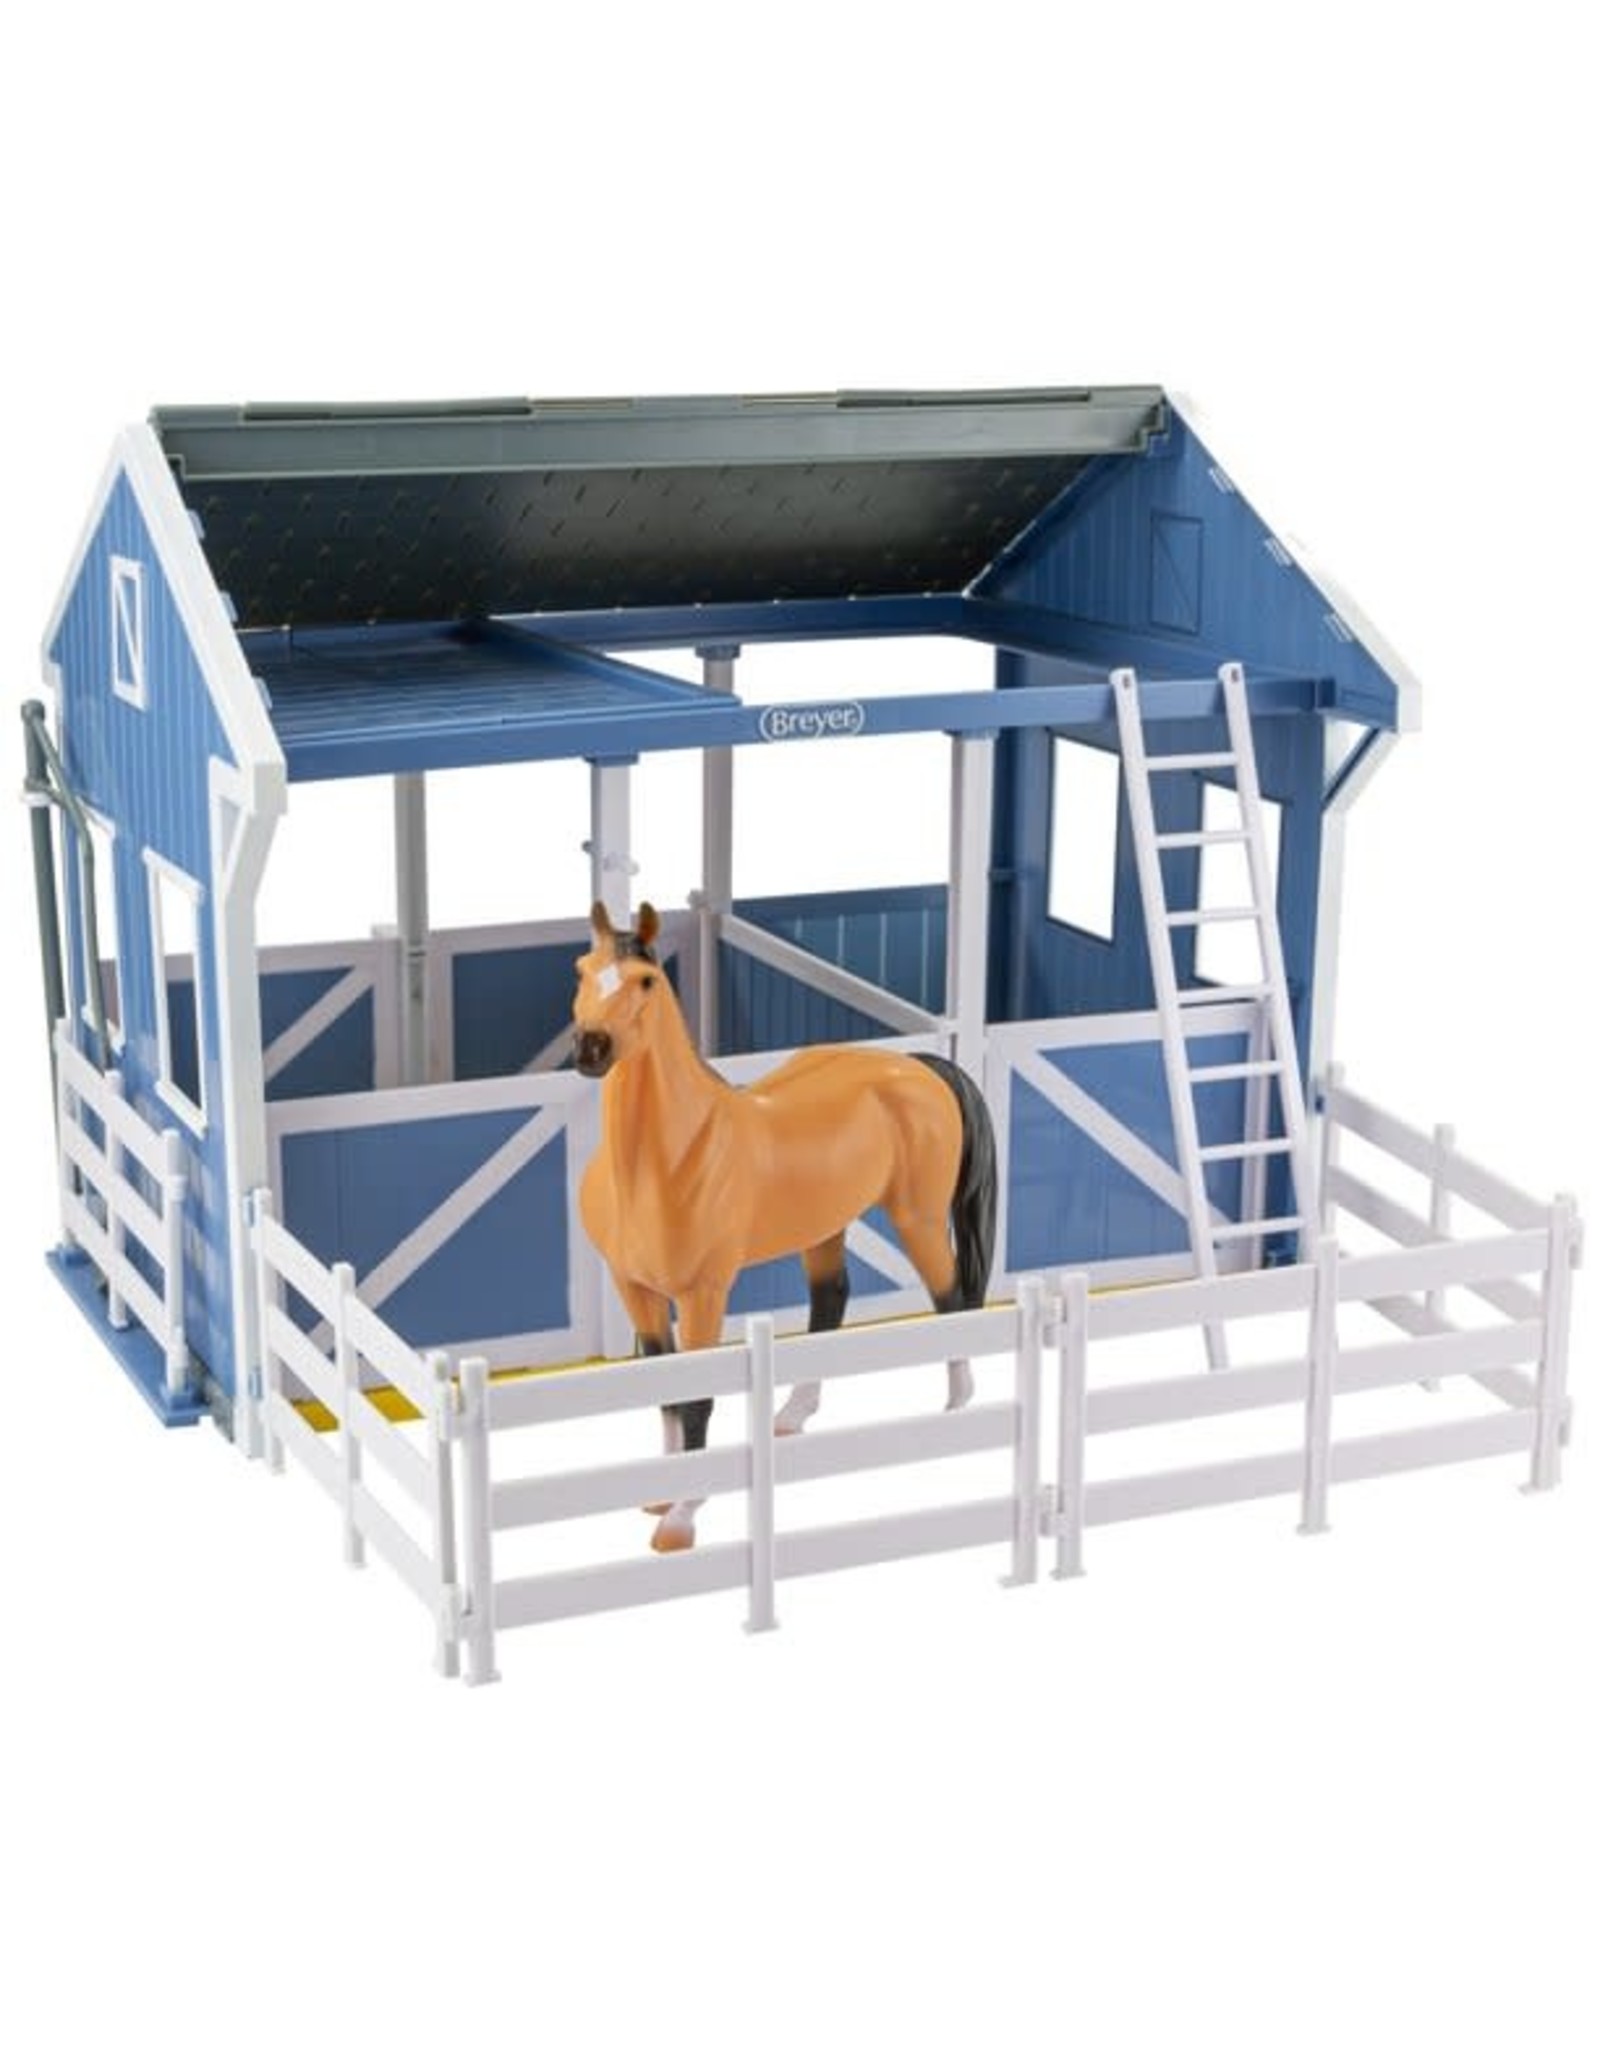 Breyer Deluxe Country Stable Playset - 61149